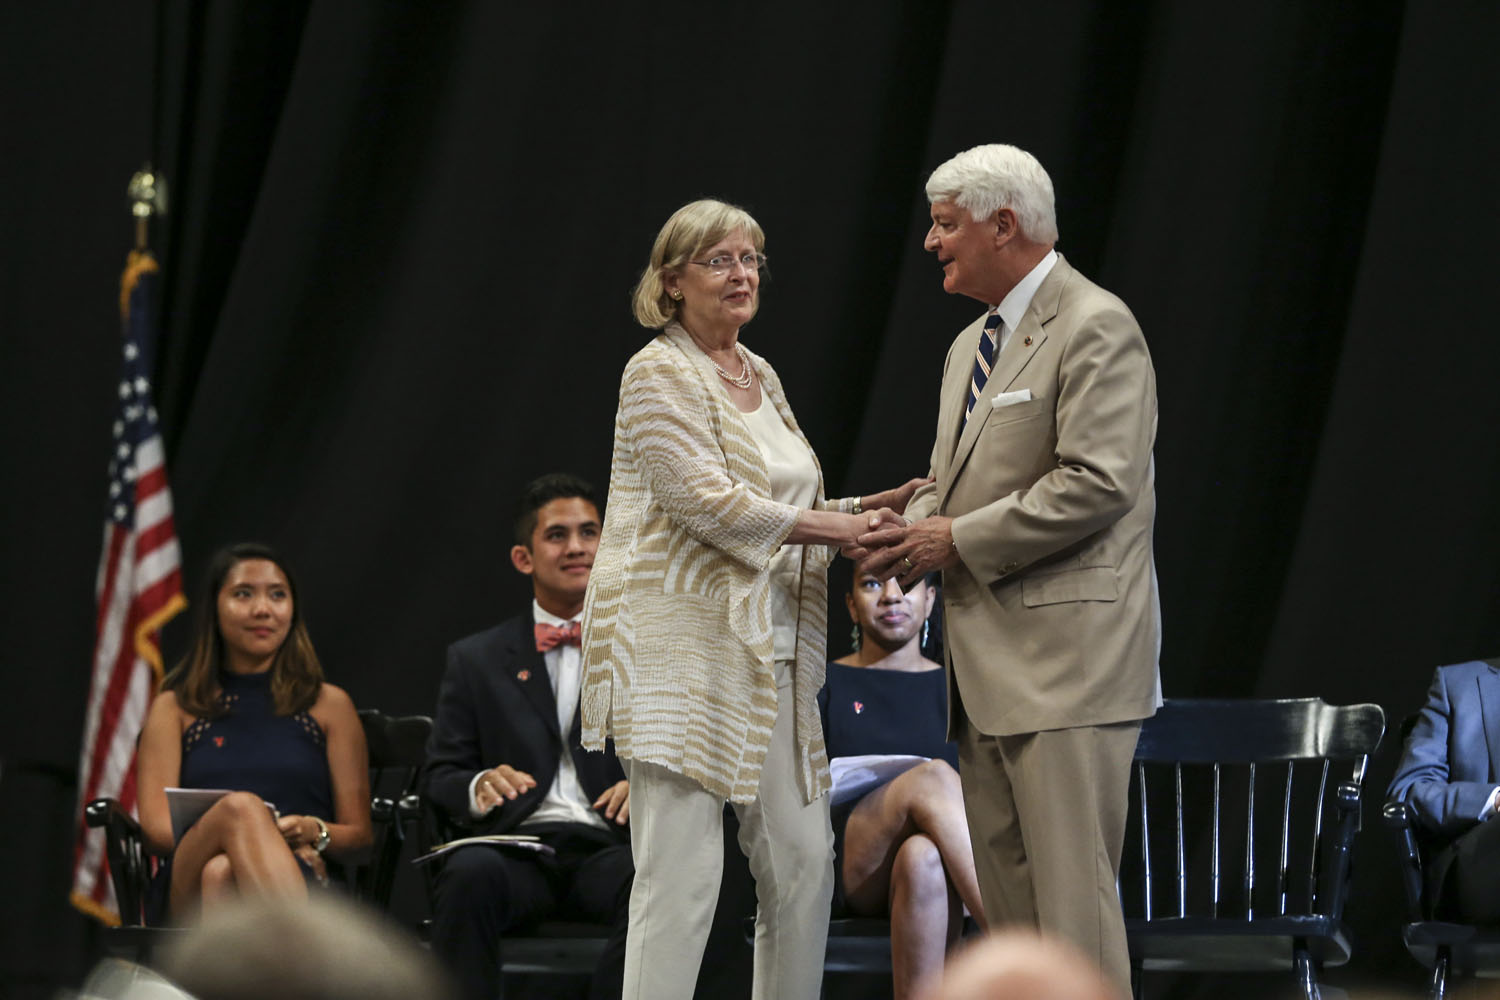 C. Thomas Faulders III, right, shakes Dorothy “Dorrie” K. Fontaine, lefts hand on stage